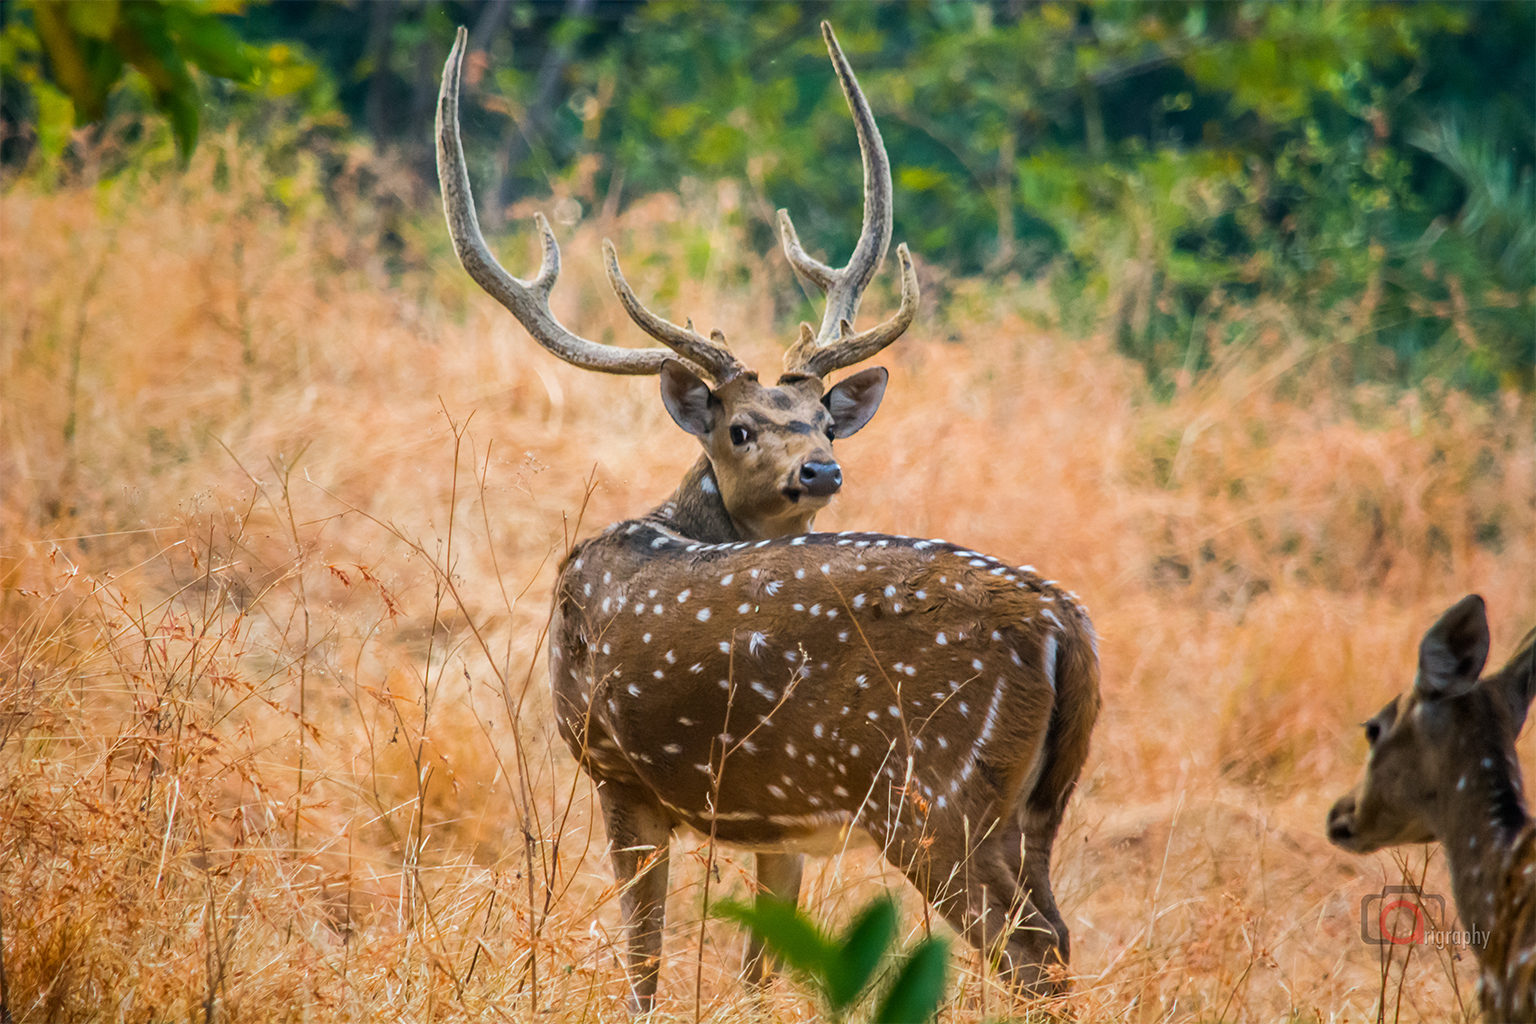 A spotted deer.